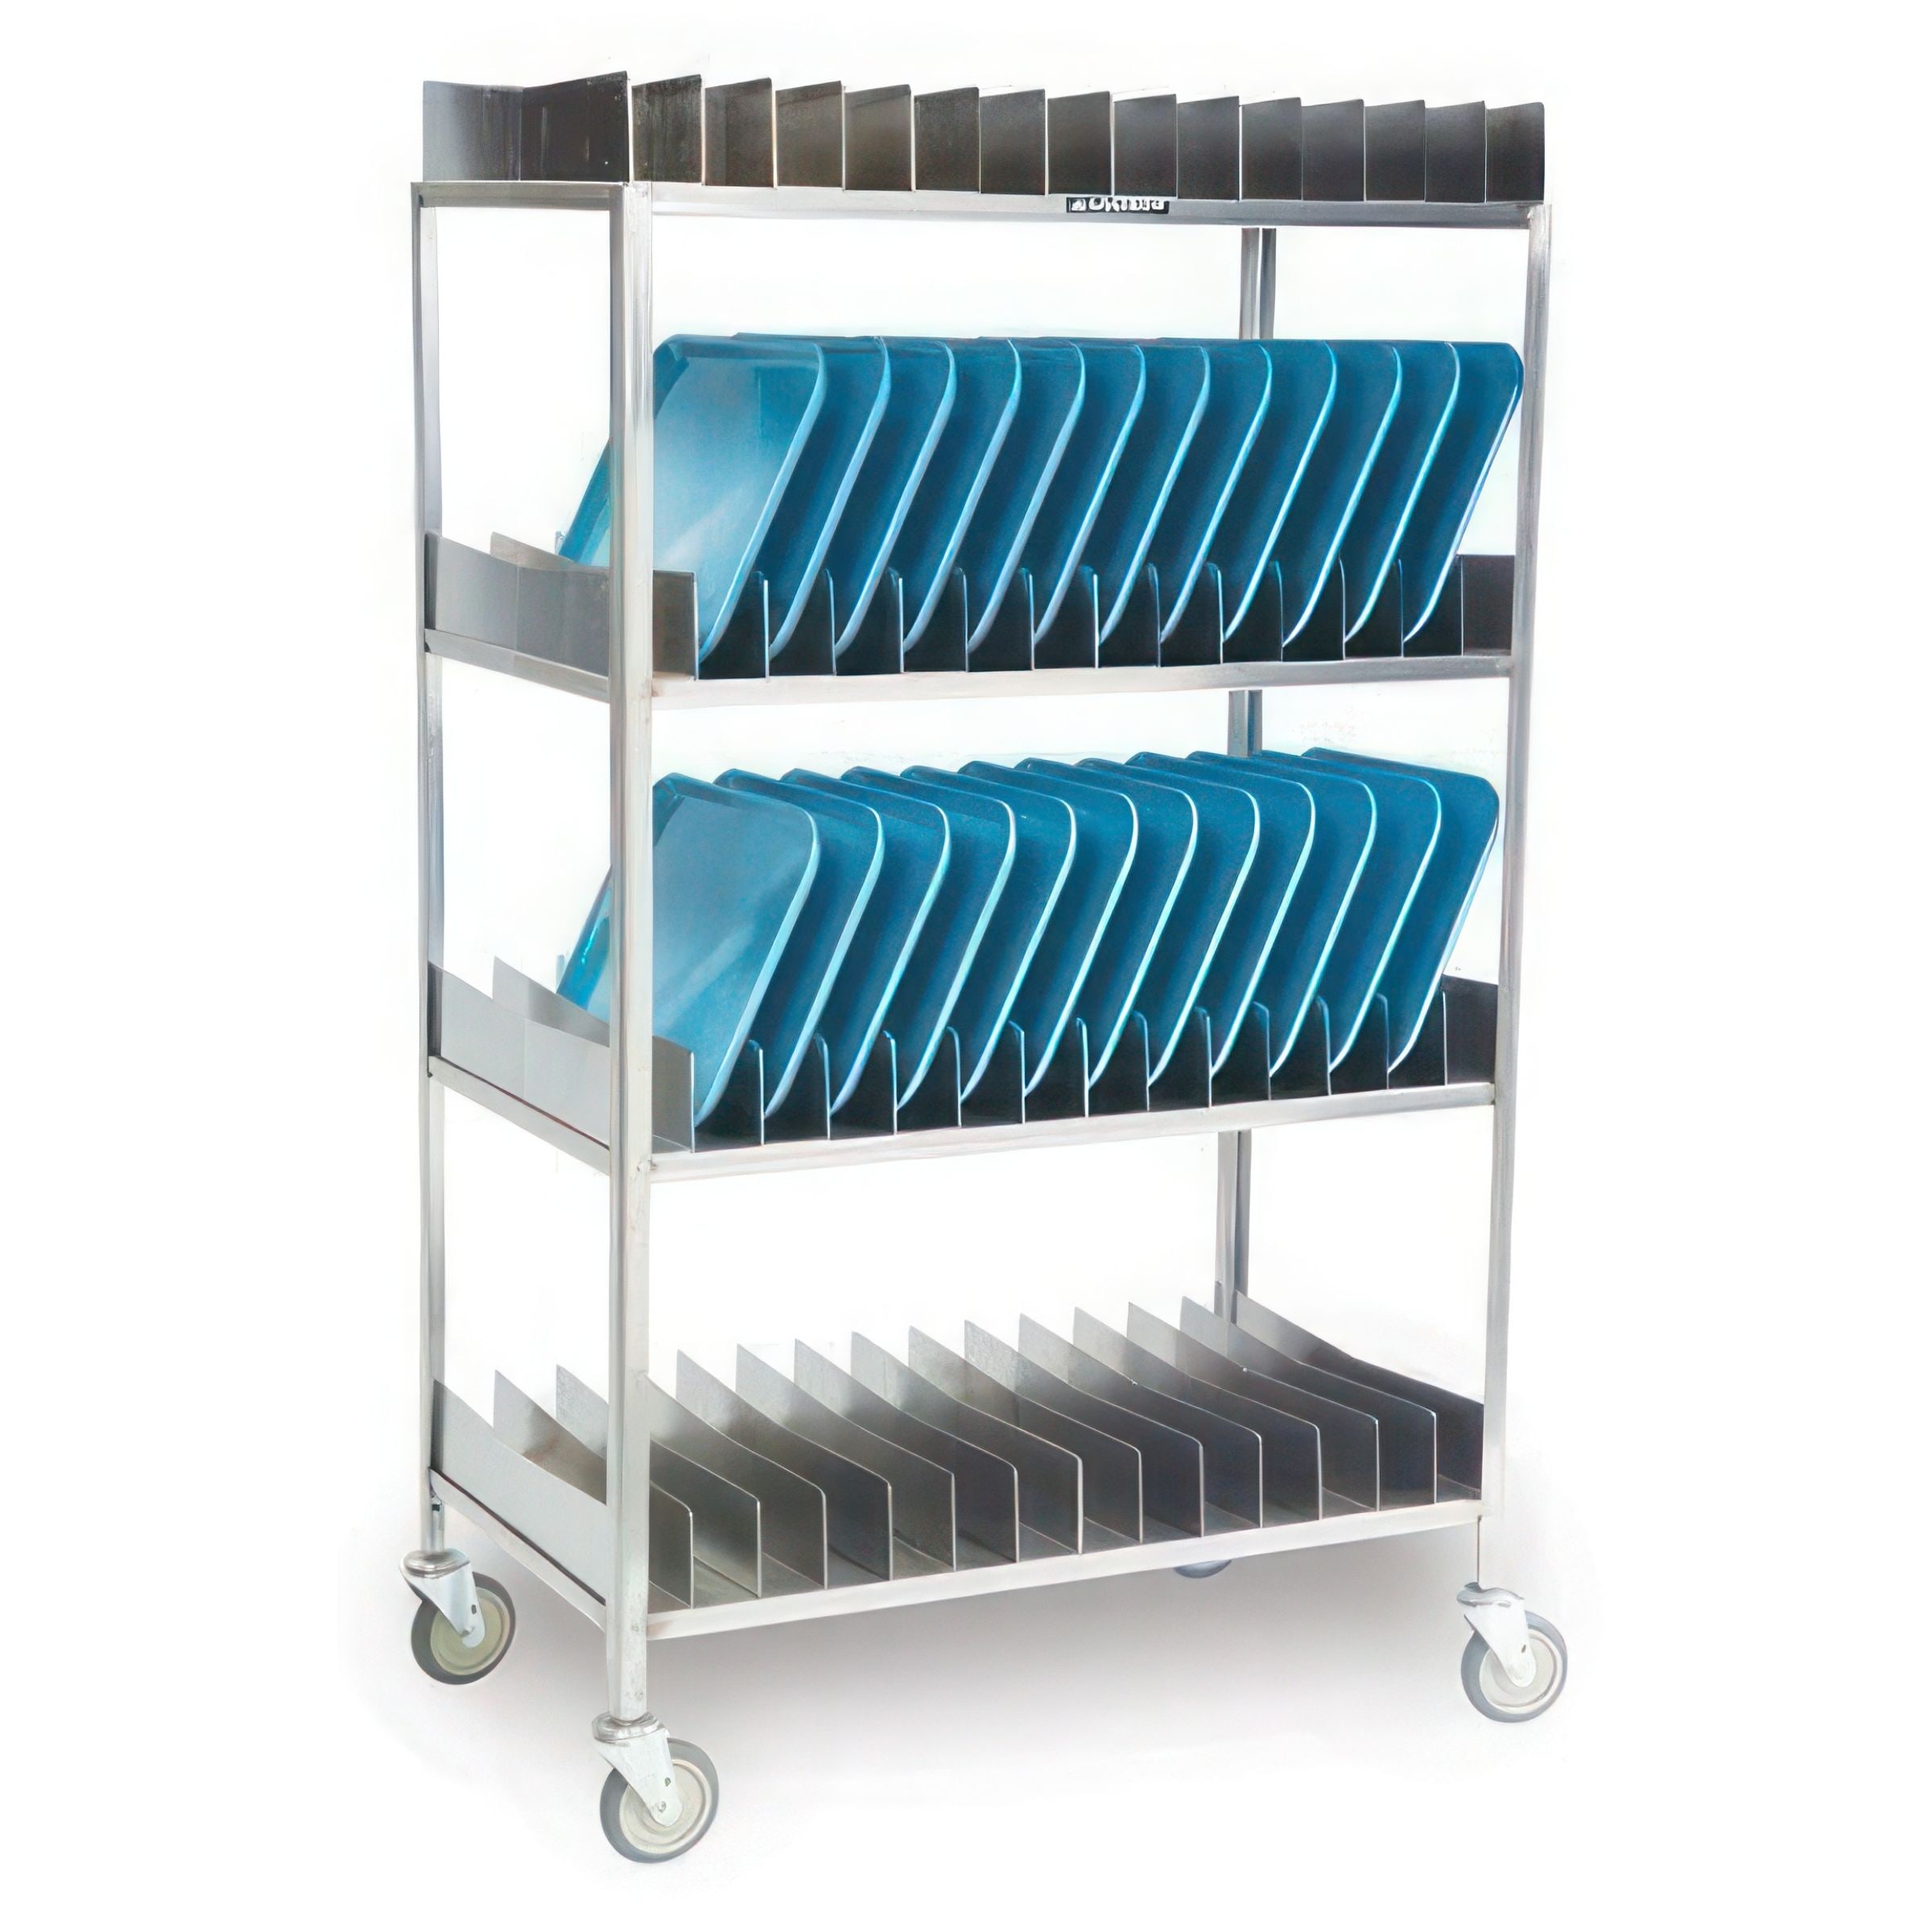 Lakeside 868 Mobile Tray Drying Rack, Stainless Steel, (4) Shelves fit 14 x  18-in. or 15 x 20-in. or 16 x 22-in. Trays, 56 Tray Capacity - Lakeside  Foodservice